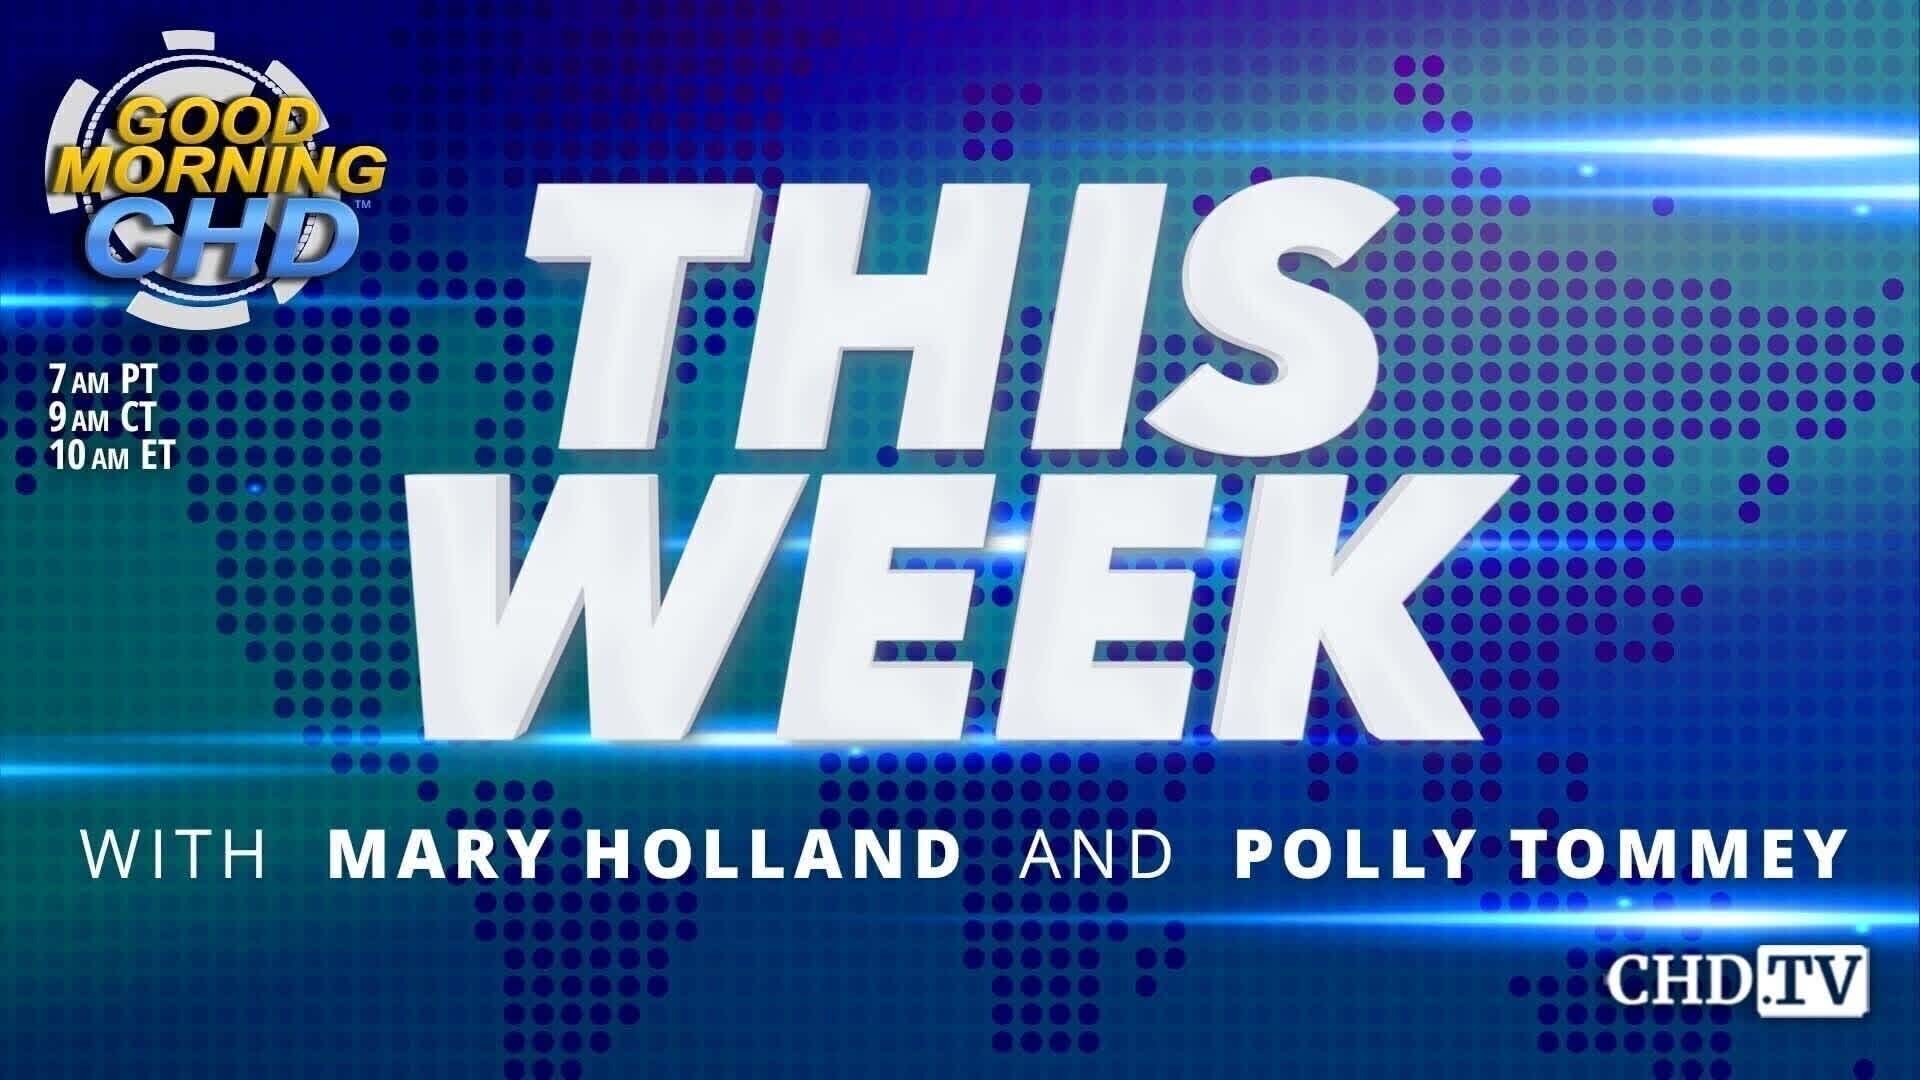 Fluoride On Trial | This Week With Mary + Polly Special